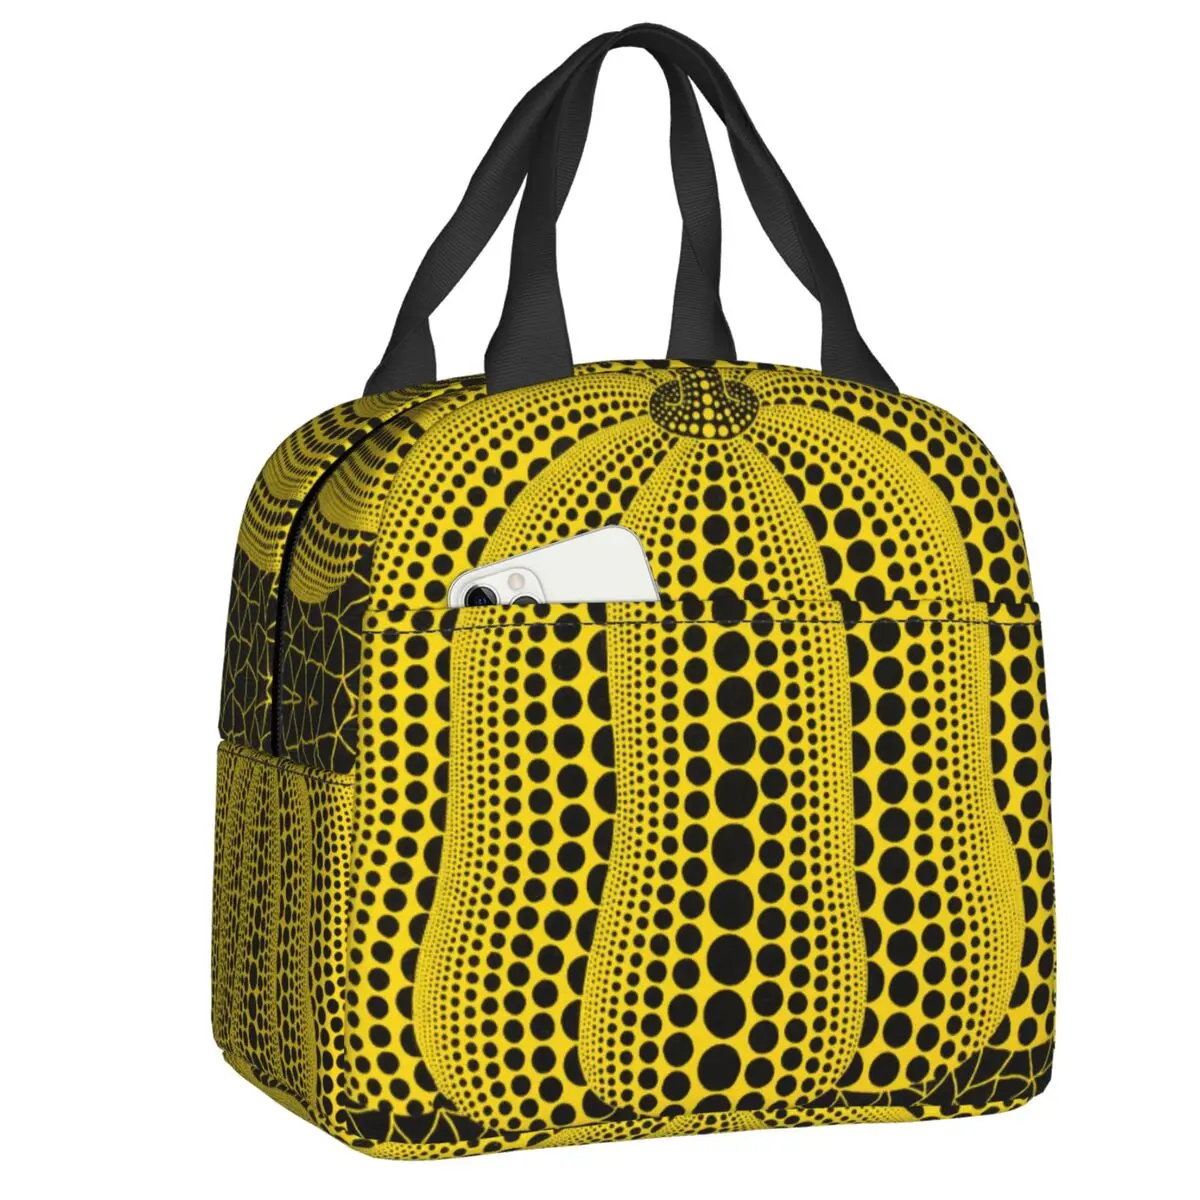 

Yayoi Kusama Abstract Pumkin Insulated Lunch Bag for Women Resuable Cooler Thermal Food Lunch Box School Work Picnic Tote Bags